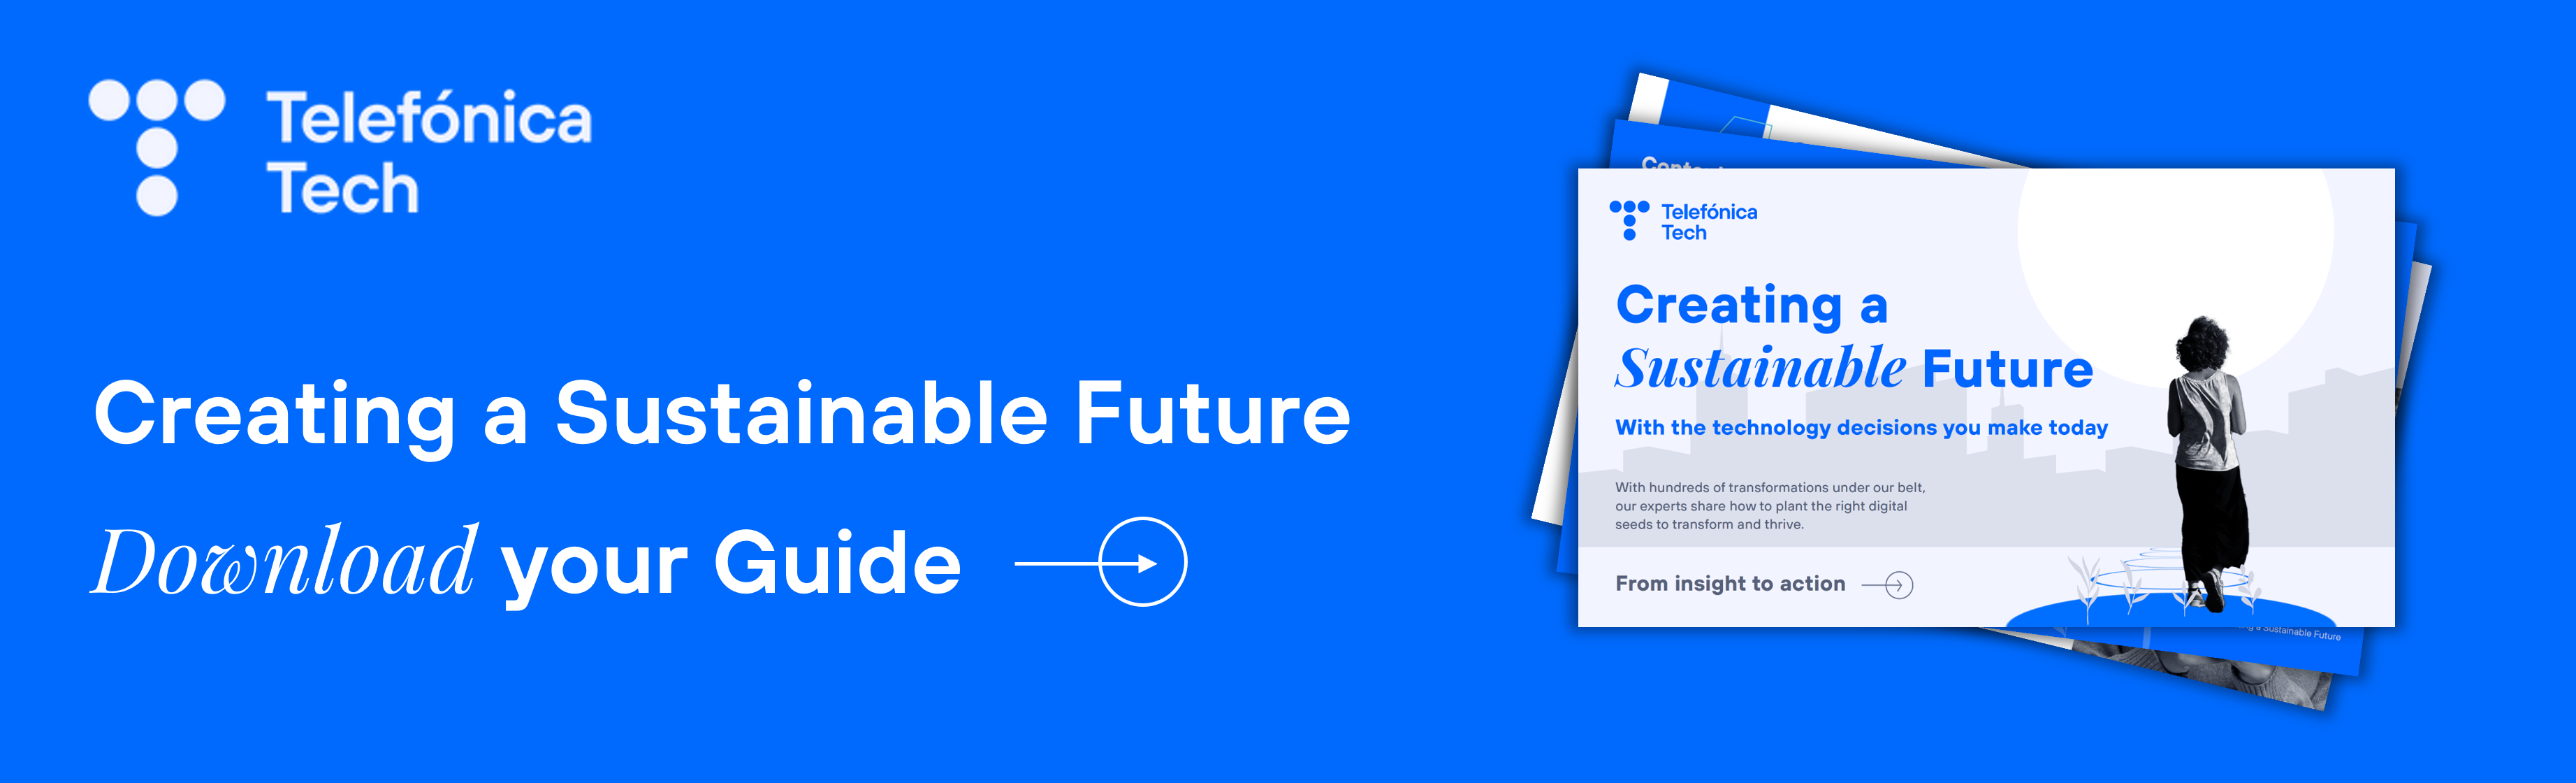 Sustainable Future Email banner